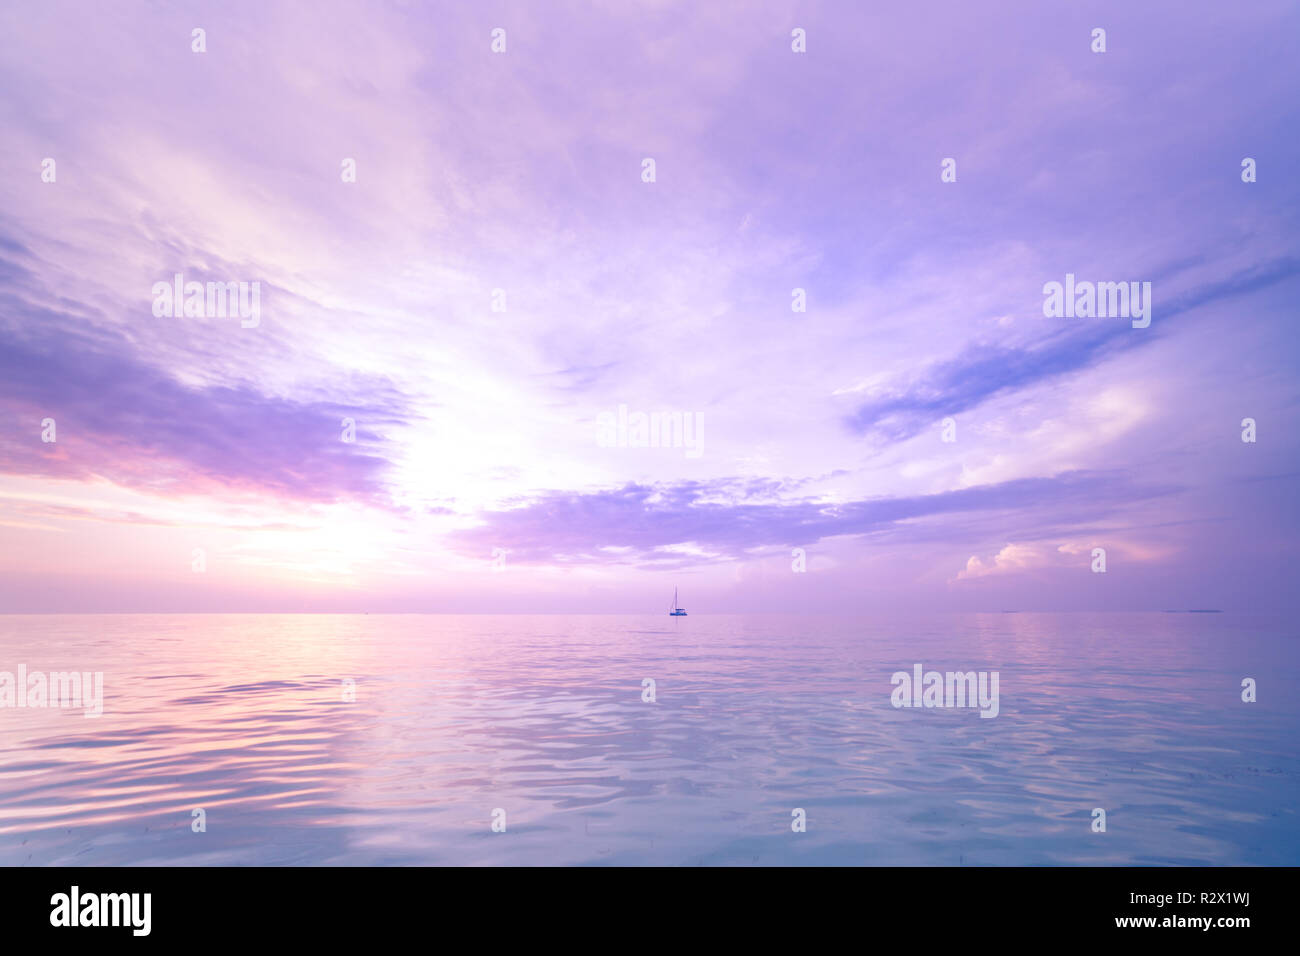 Sea sky clouds, horizon. Colorful seascape horizontal background banner. Inspirational calm sea with sunset sky. Meditation ocean and sky background Stock Photo